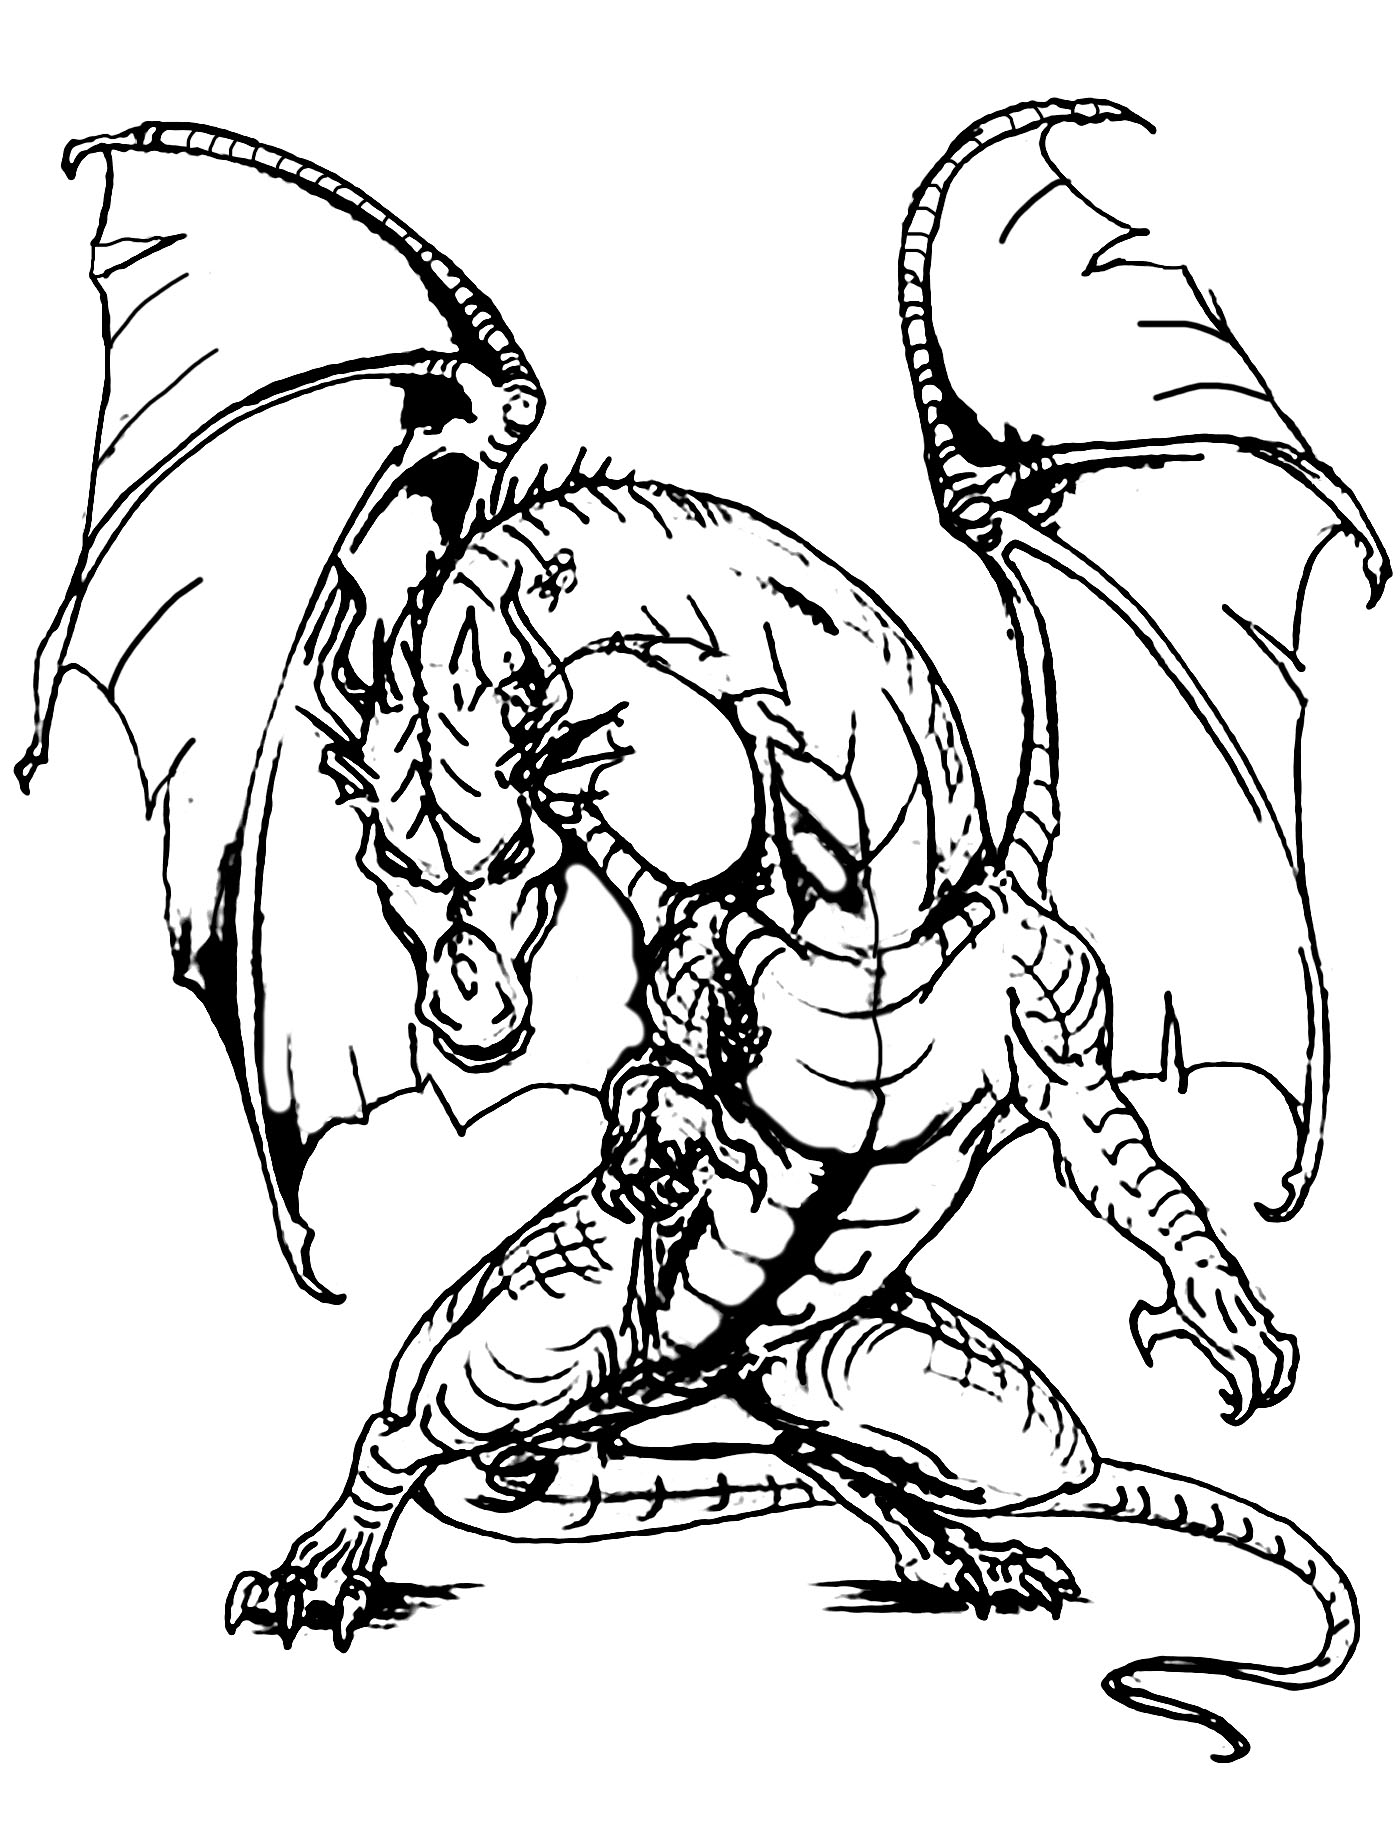 Download Giant dragon | Myths & legends - Coloring pages for adults ...